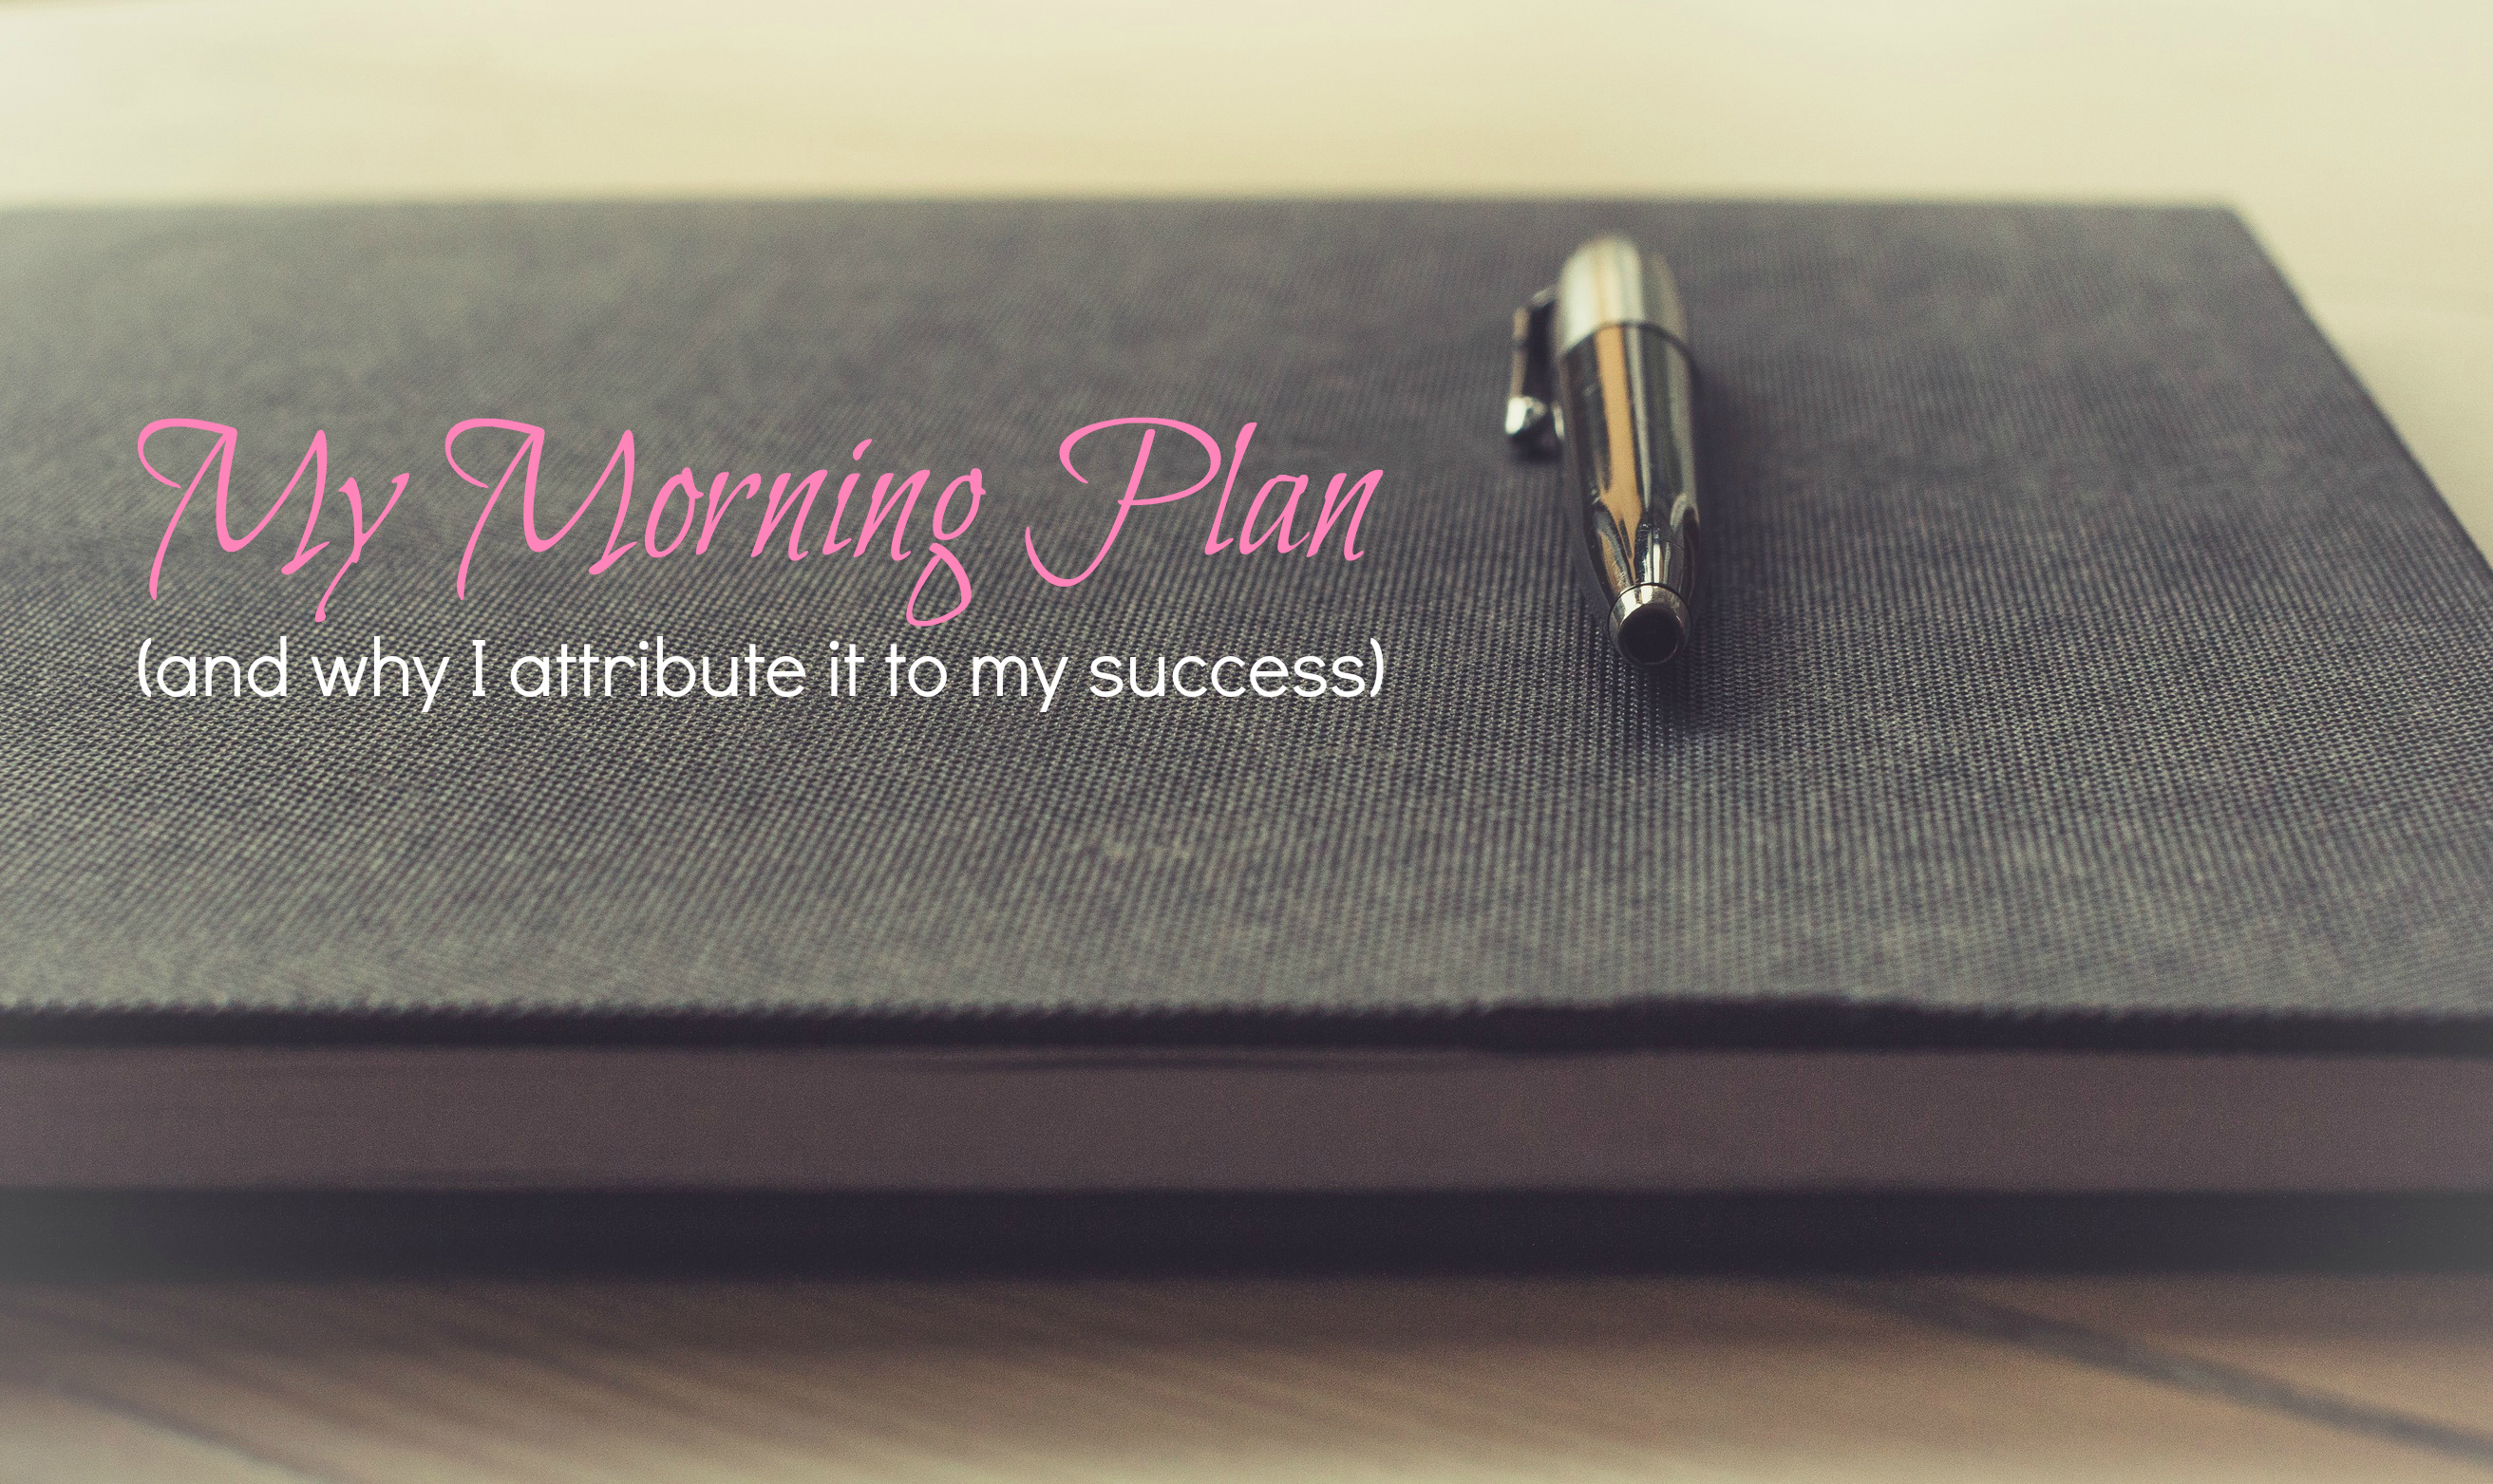 My Morning Plan (And Why I Attribute it to My Success)